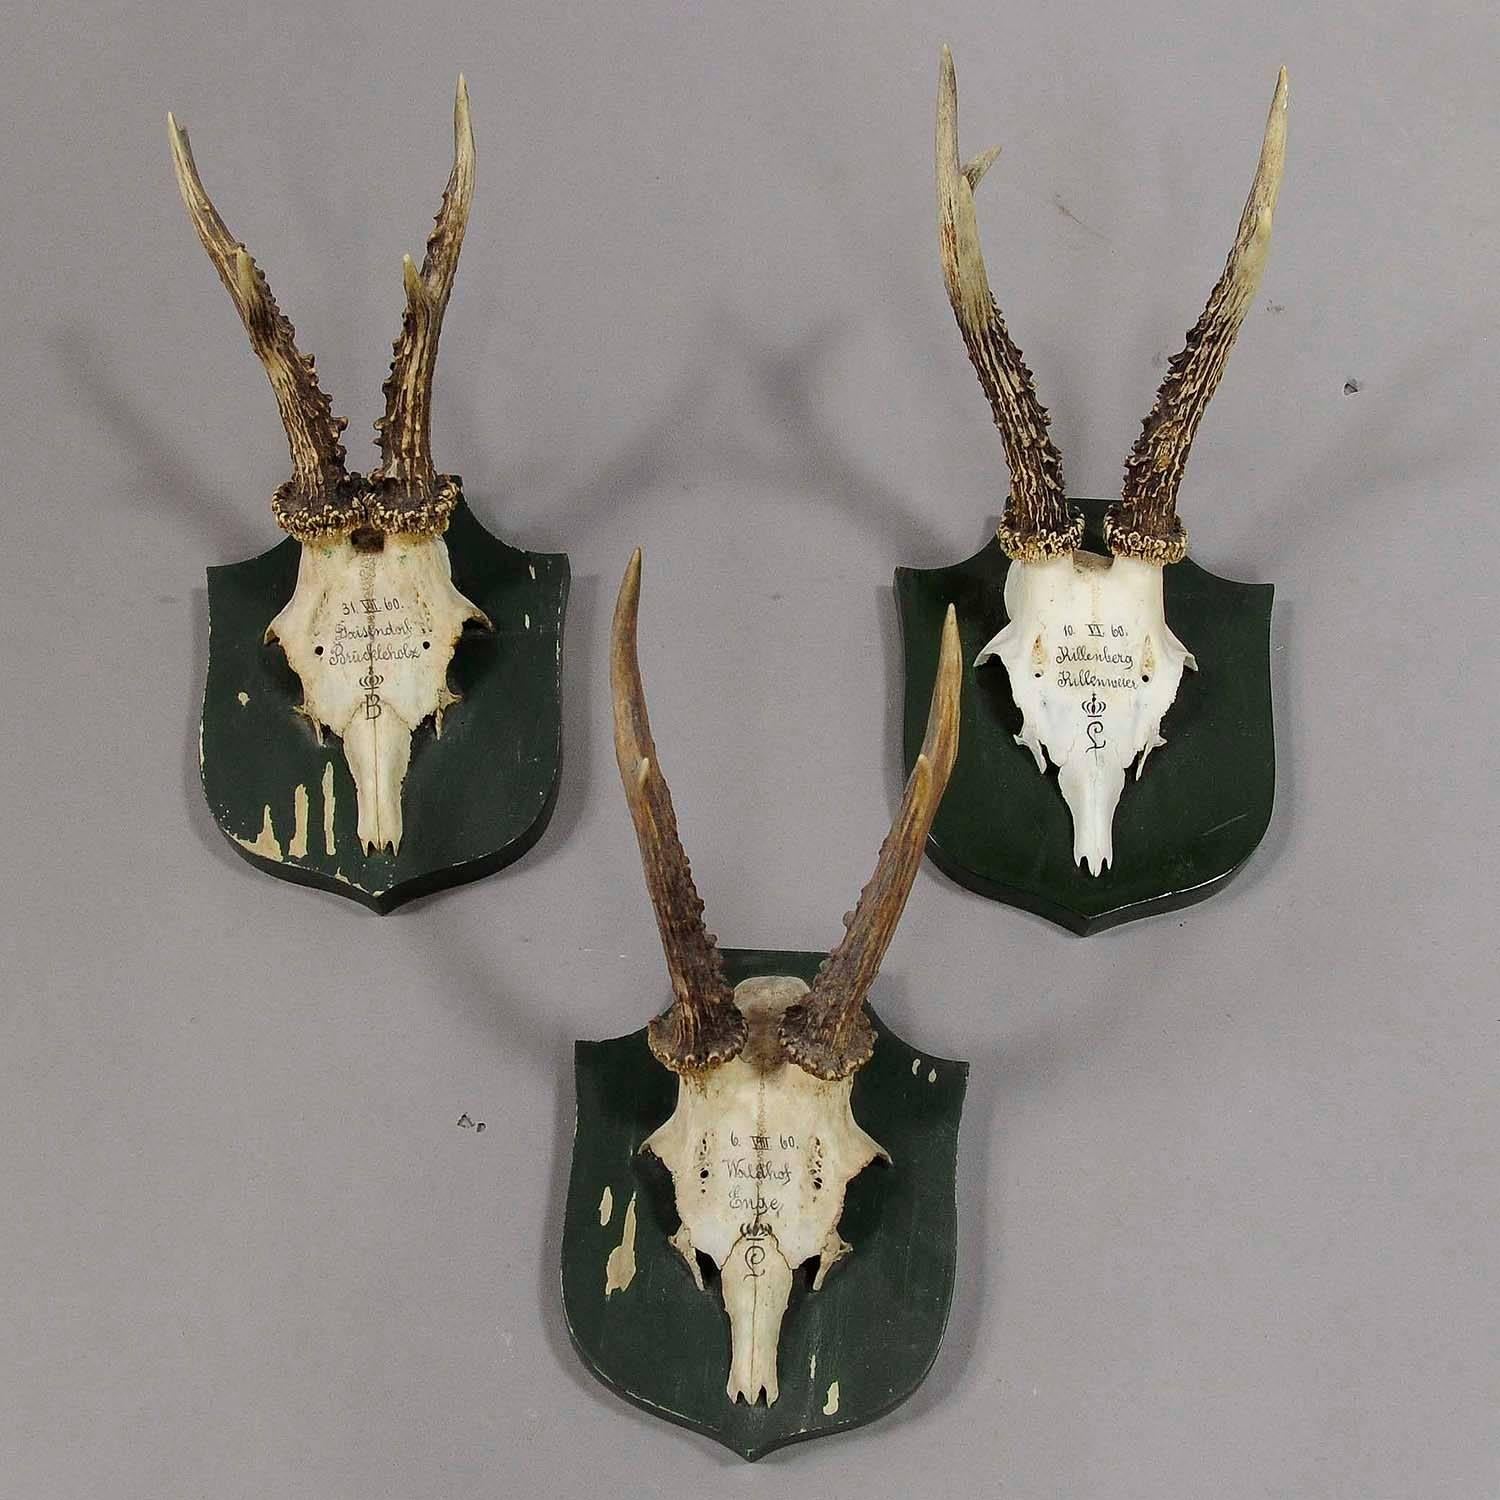 A set of six antique black forest deer trophies on wooden plaques. Remaining from the stately home of palace Salem in South Germany. All trophies were shot by members of the family of Margrave Maximilian of Baden. Handwritten inscriptions on the